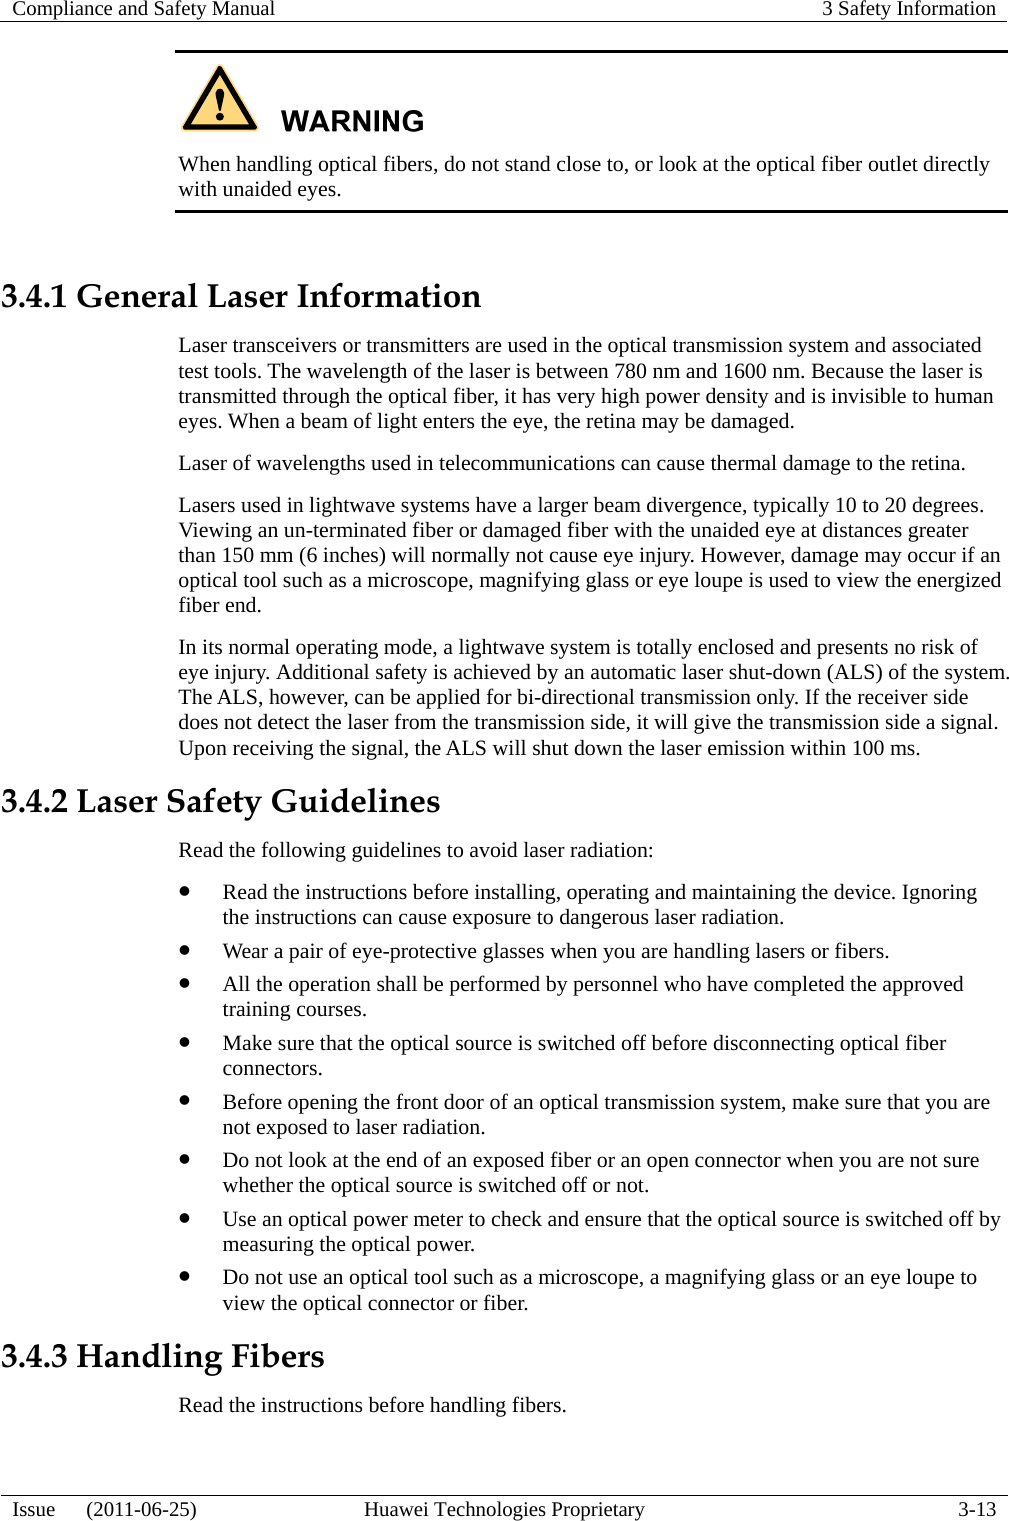 Compliance and Safety Manual  3 Safety Information  Issue   (2011-06-25)  Huawei Technologies Proprietary  3-13  When handling optical fibers, do not stand close to, or look at the optical fiber outlet directly with unaided eyes.  3.4.1 General Laser Information Laser transceivers or transmitters are used in the optical transmission system and associated test tools. The wavelength of the laser is between 780 nm and 1600 nm. Because the laser is transmitted through the optical fiber, it has very high power density and is invisible to human eyes. When a beam of light enters the eye, the retina may be damaged. Laser of wavelengths used in telecommunications can cause thermal damage to the retina. Lasers used in lightwave systems have a larger beam divergence, typically 10 to 20 degrees. Viewing an un-terminated fiber or damaged fiber with the unaided eye at distances greater than 150 mm (6 inches) will normally not cause eye injury. However, damage may occur if an optical tool such as a microscope, magnifying glass or eye loupe is used to view the energized fiber end. In its normal operating mode, a lightwave system is totally enclosed and presents no risk of eye injury. Additional safety is achieved by an automatic laser shut-down (ALS) of the system. The ALS, however, can be applied for bi-directional transmission only. If the receiver side does not detect the laser from the transmission side, it will give the transmission side a signal. Upon receiving the signal, the ALS will shut down the laser emission within 100 ms. 3.4.2 Laser Safety Guidelines Read the following guidelines to avoid laser radiation: z Read the instructions before installing, operating and maintaining the device. Ignoring the instructions can cause exposure to dangerous laser radiation. z Wear a pair of eye-protective glasses when you are handling lasers or fibers. z All the operation shall be performed by personnel who have completed the approved training courses. z Make sure that the optical source is switched off before disconnecting optical fiber connectors. z Before opening the front door of an optical transmission system, make sure that you are not exposed to laser radiation. z Do not look at the end of an exposed fiber or an open connector when you are not sure whether the optical source is switched off or not. z Use an optical power meter to check and ensure that the optical source is switched off by measuring the optical power. z Do not use an optical tool such as a microscope, a magnifying glass or an eye loupe to view the optical connector or fiber. 3.4.3 Handling Fibers Read the instructions before handling fibers. 